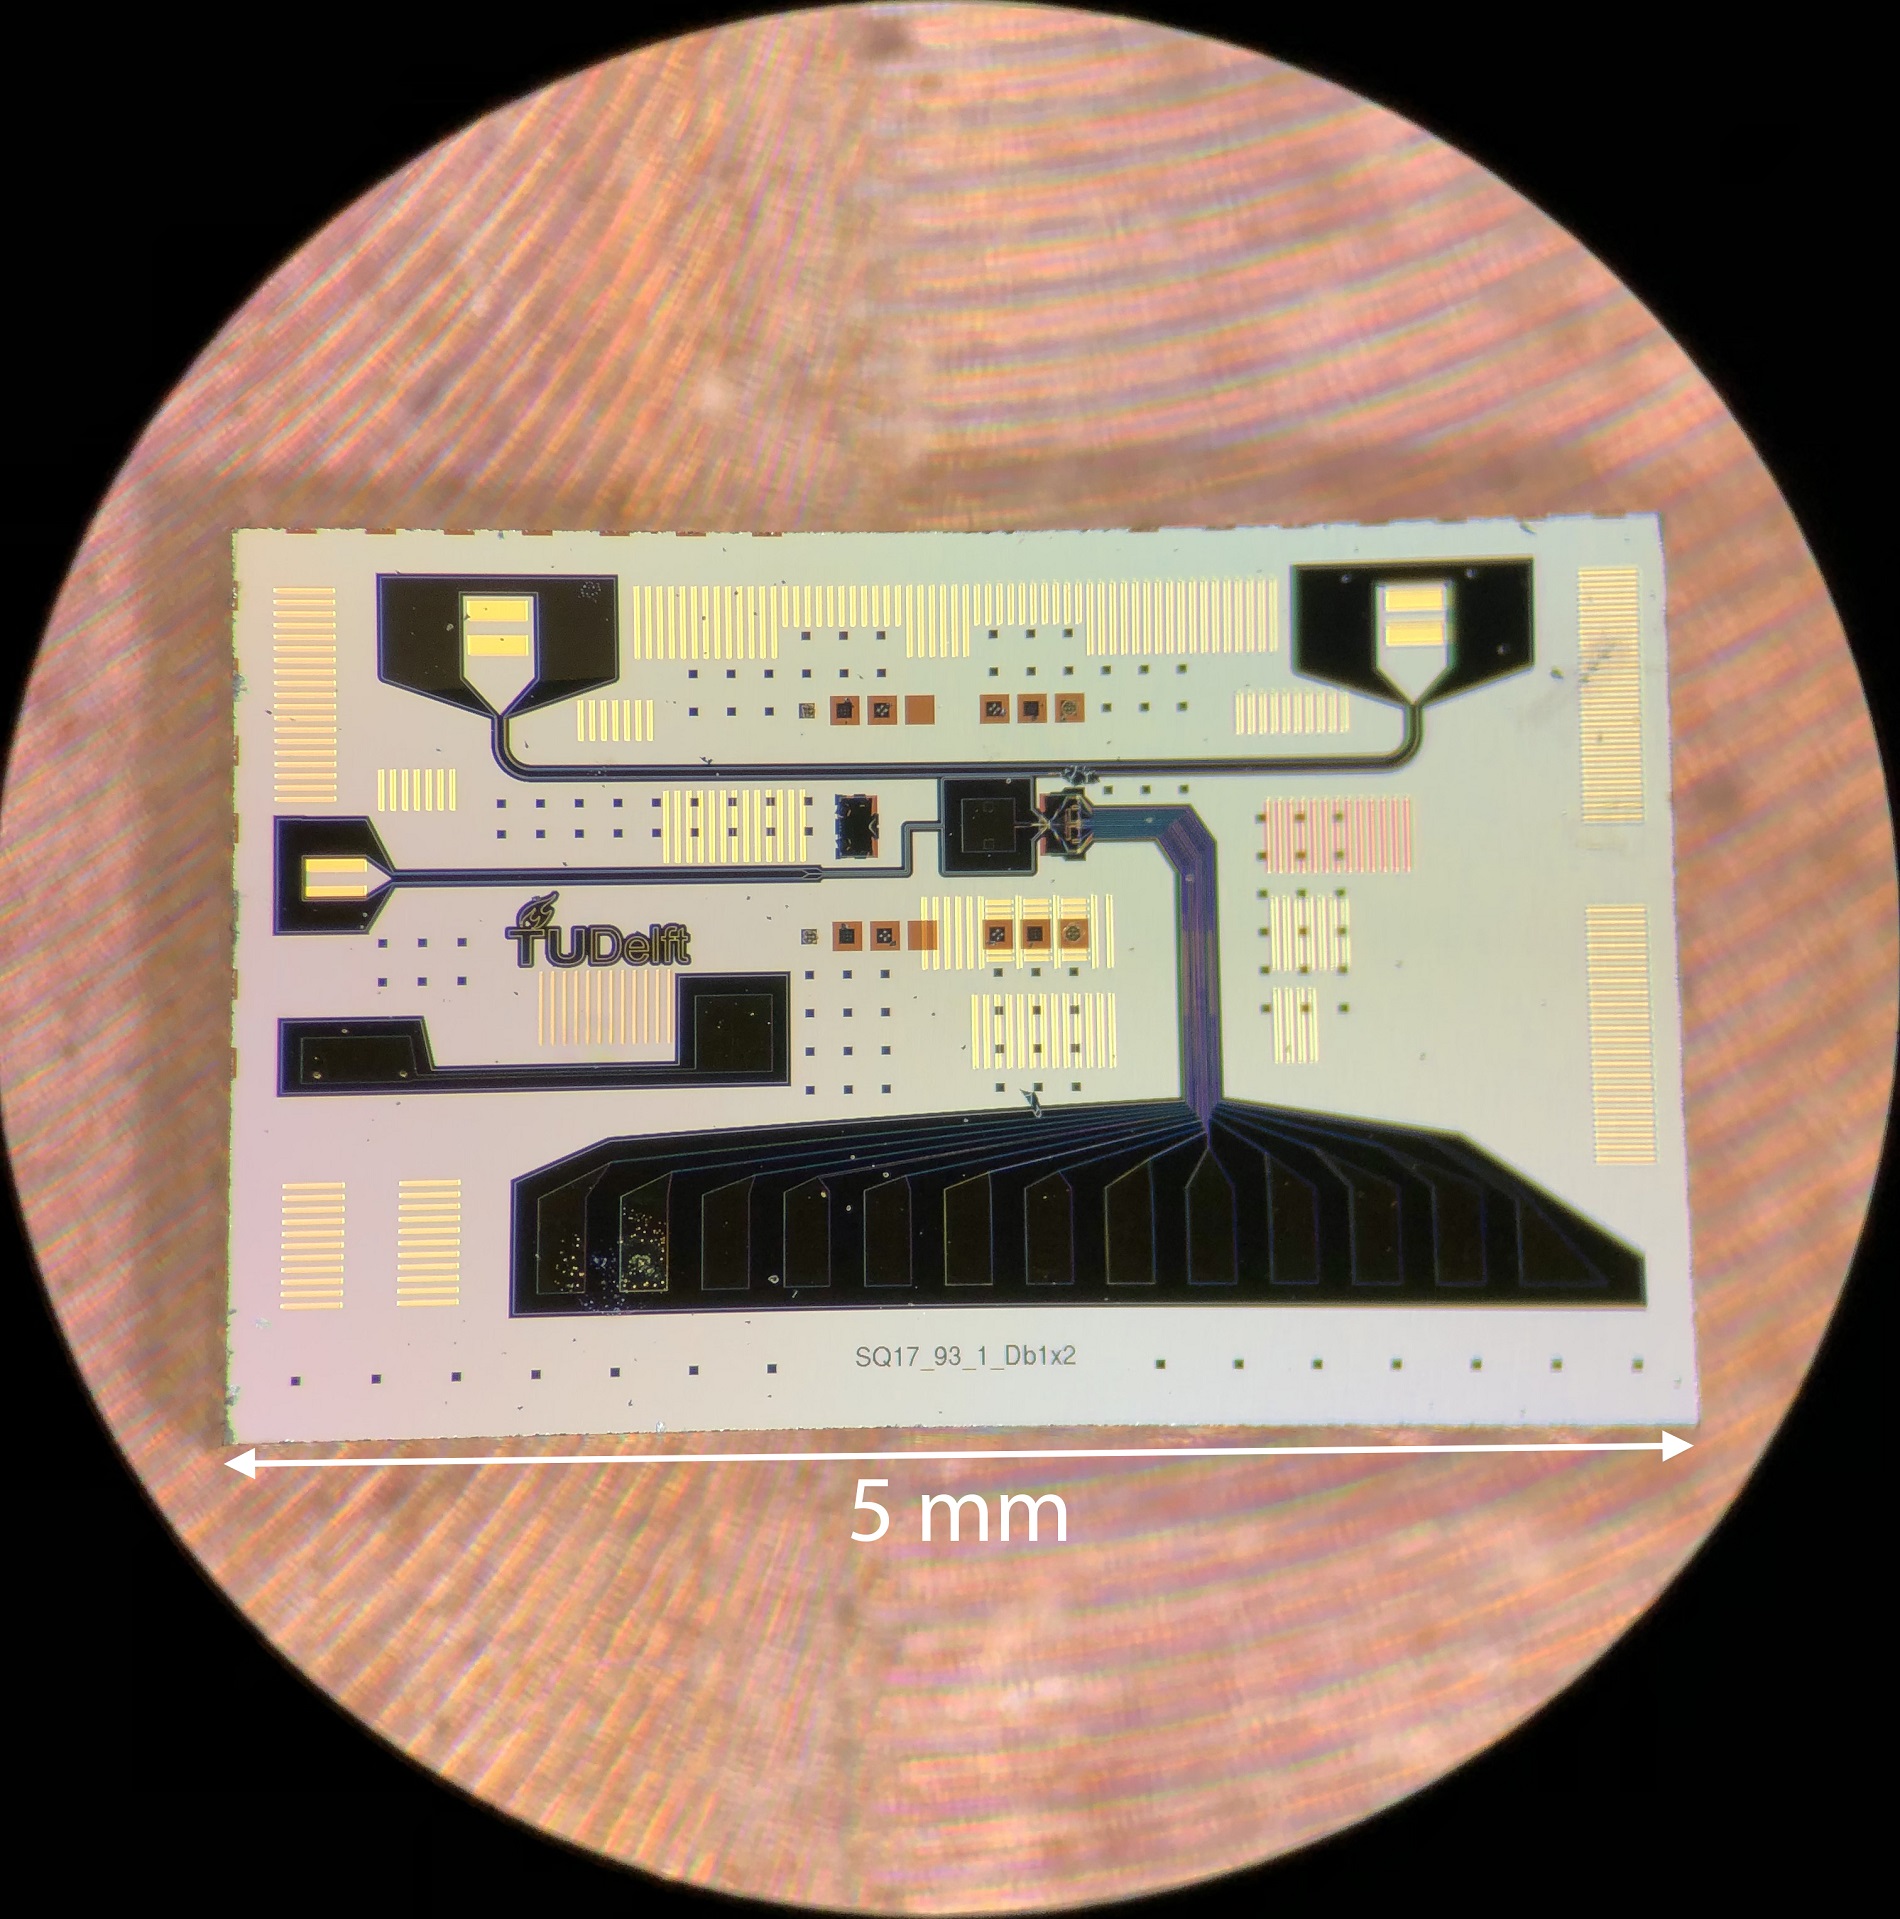 Optical microscope image of the quantum chip with the on-chip resonator and quantum dots